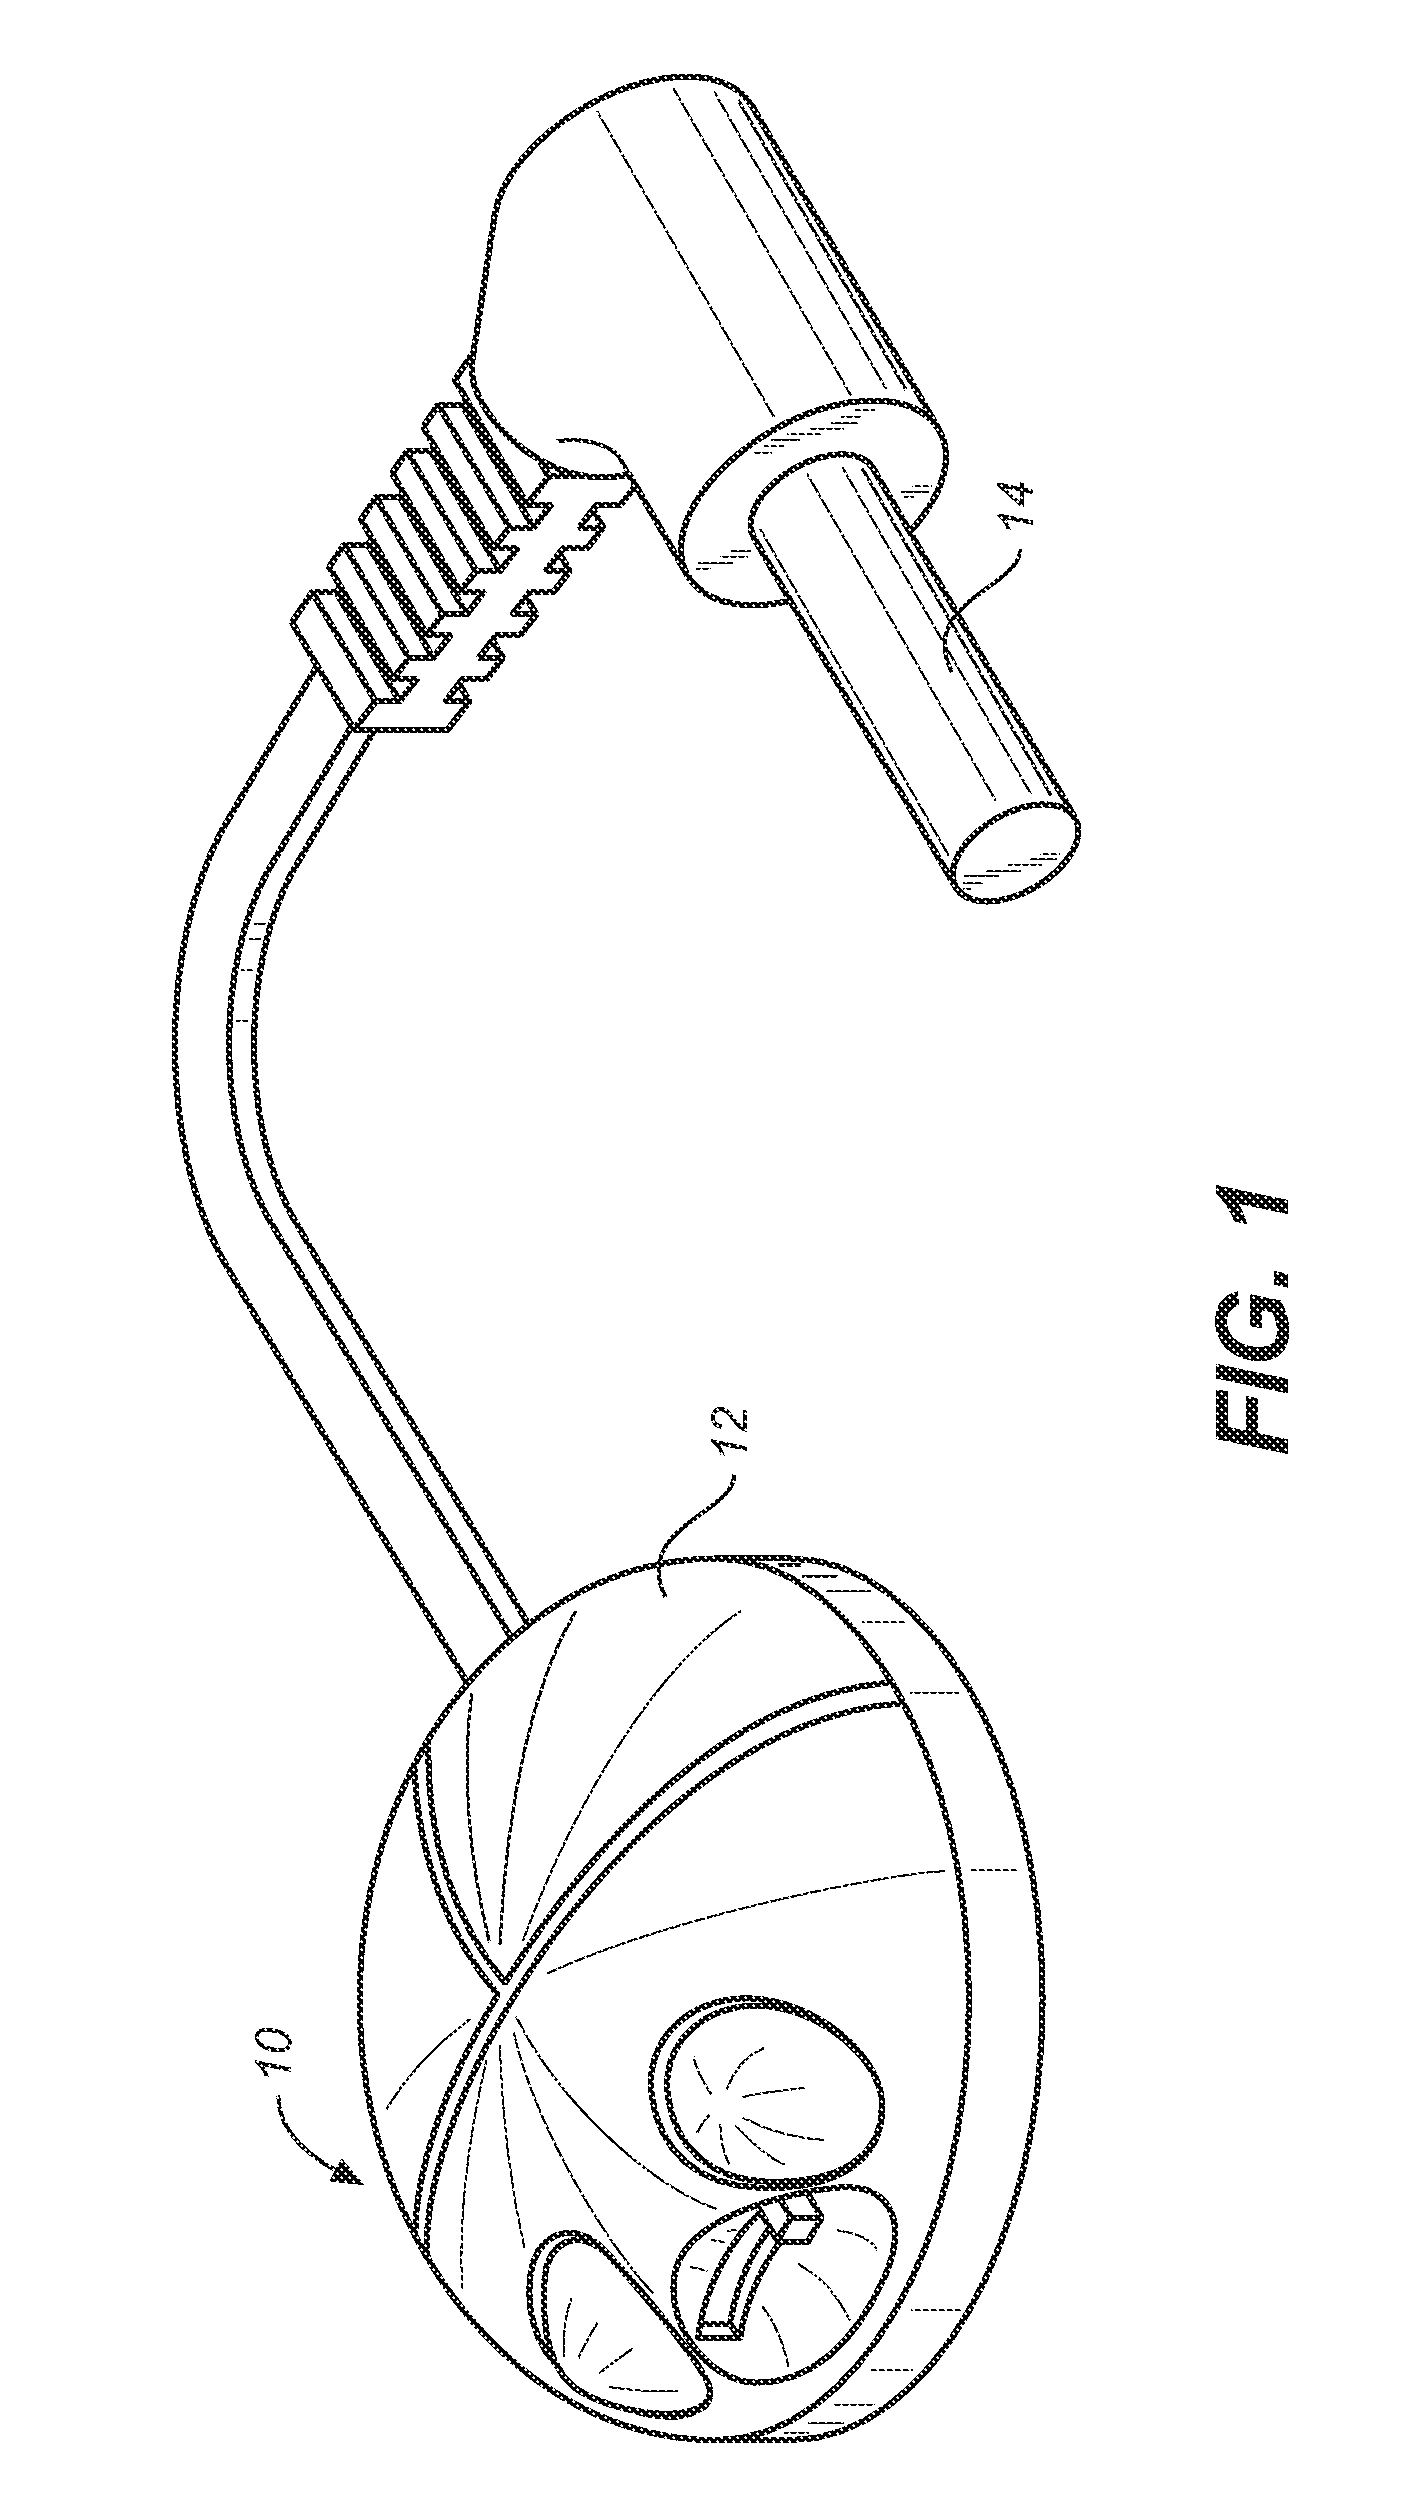 Circuit and method for providing an auto-off capability for a wireless transmitter